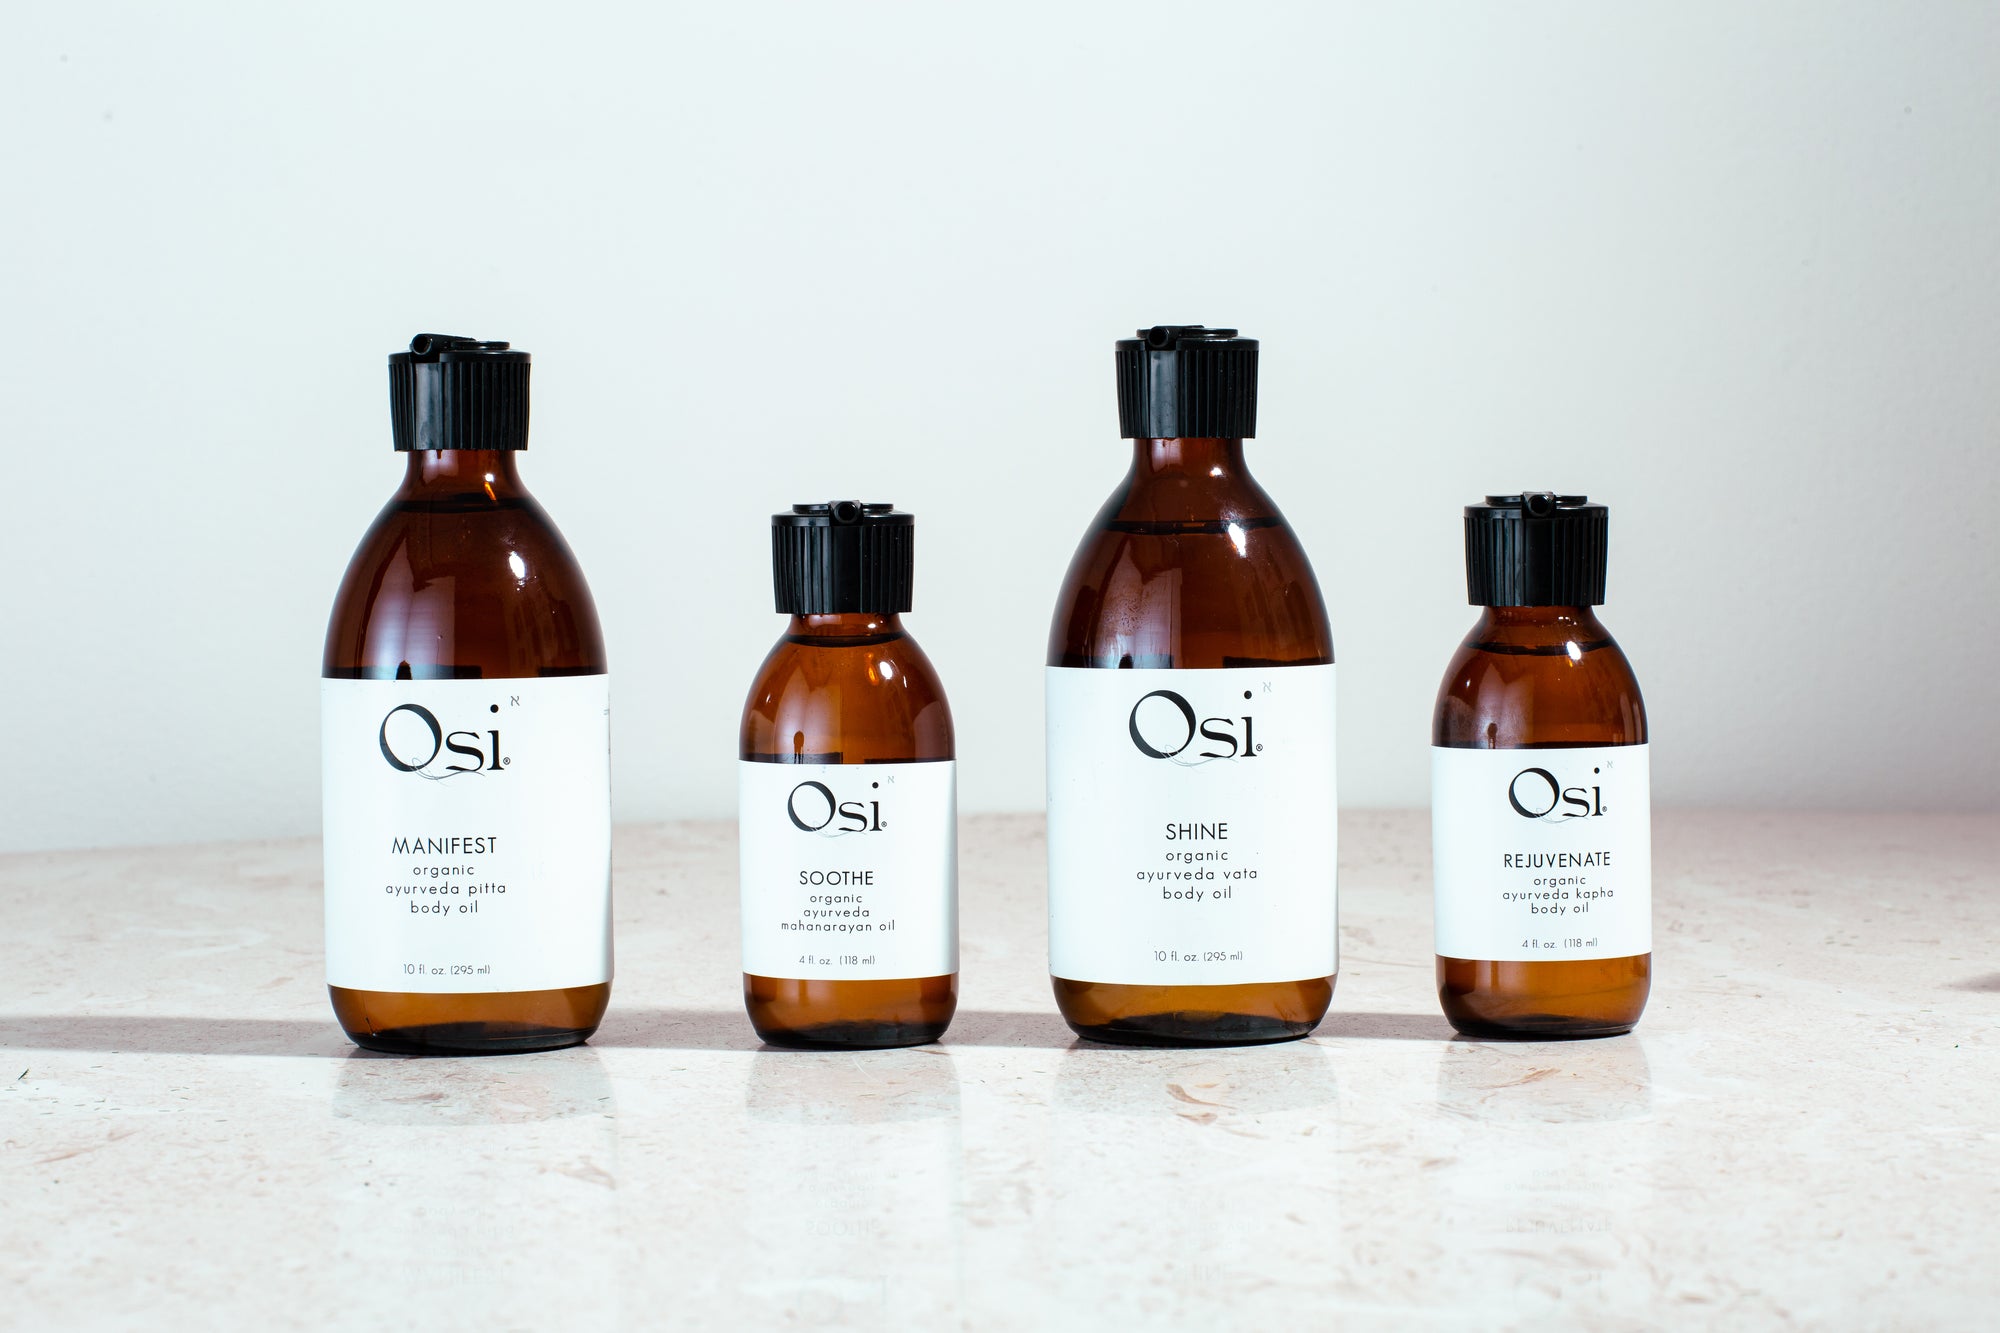 Body Oil Collection